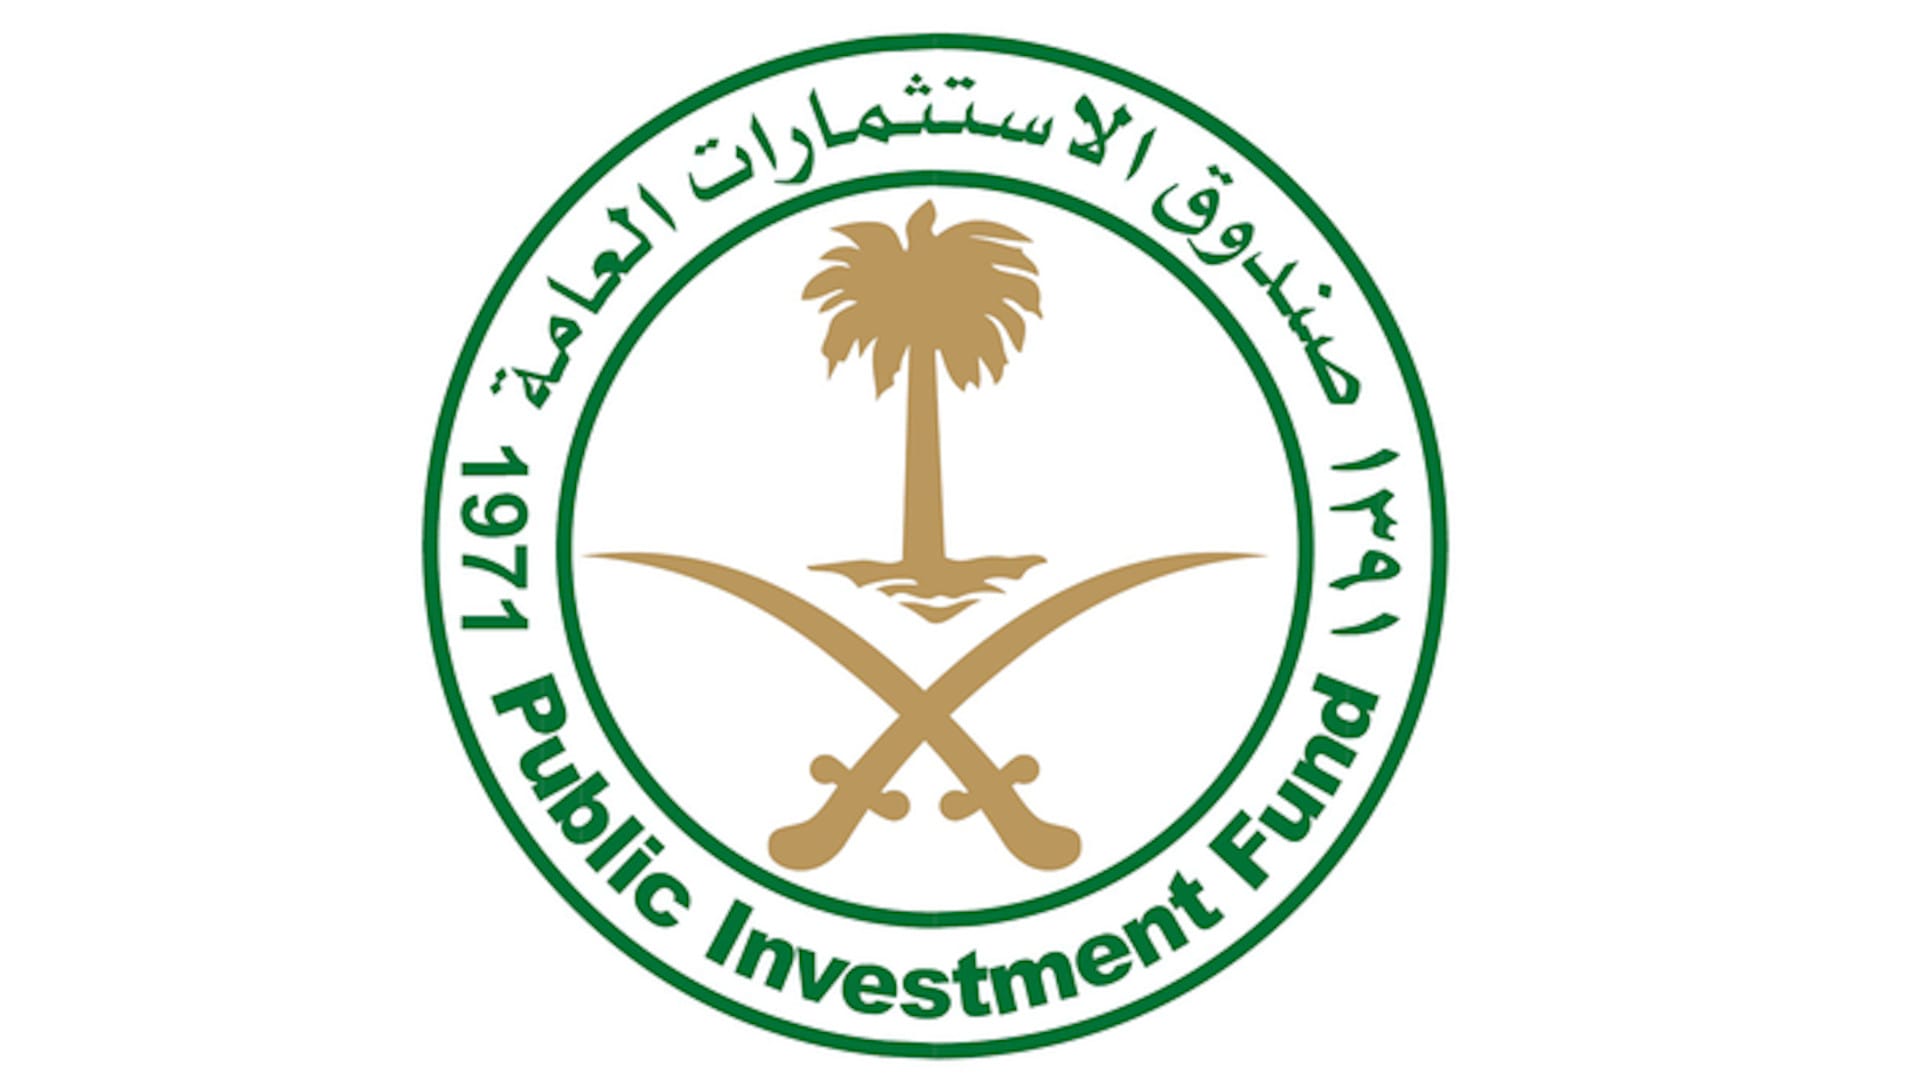 The logo for the Saudi Public Investment Fund, which is owned by crown prince Mohammed bin Salman